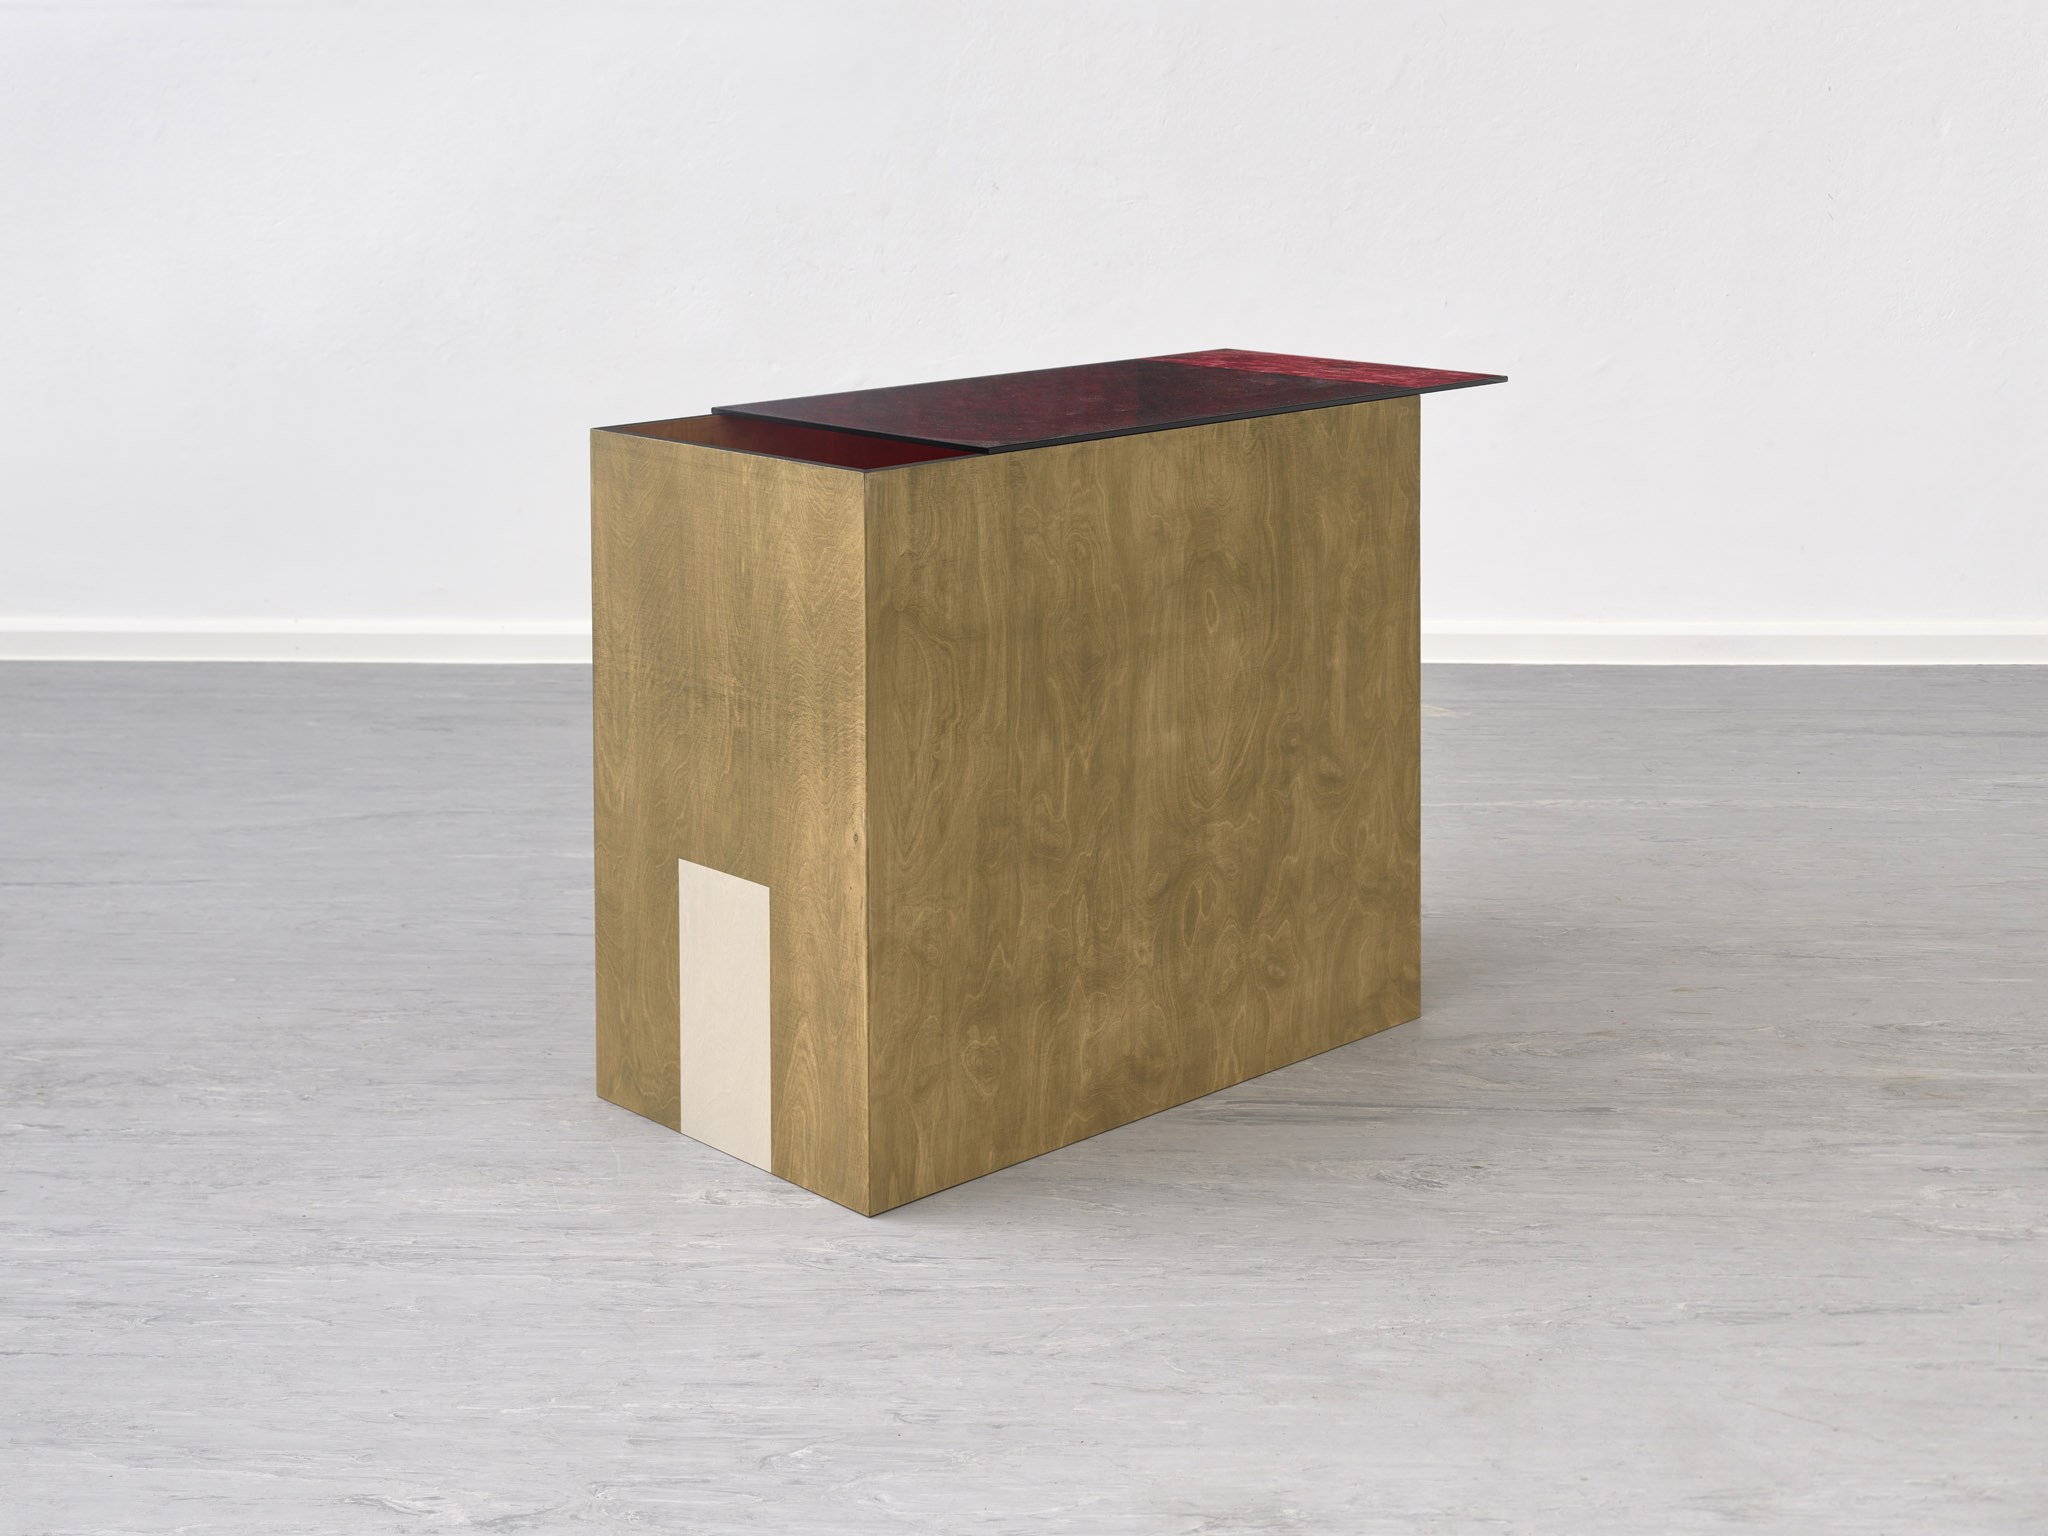 Sunah Choi, "Sideboard Building", 2023, wood, color, glass, varnish, 102 x 76 x 45 cm 